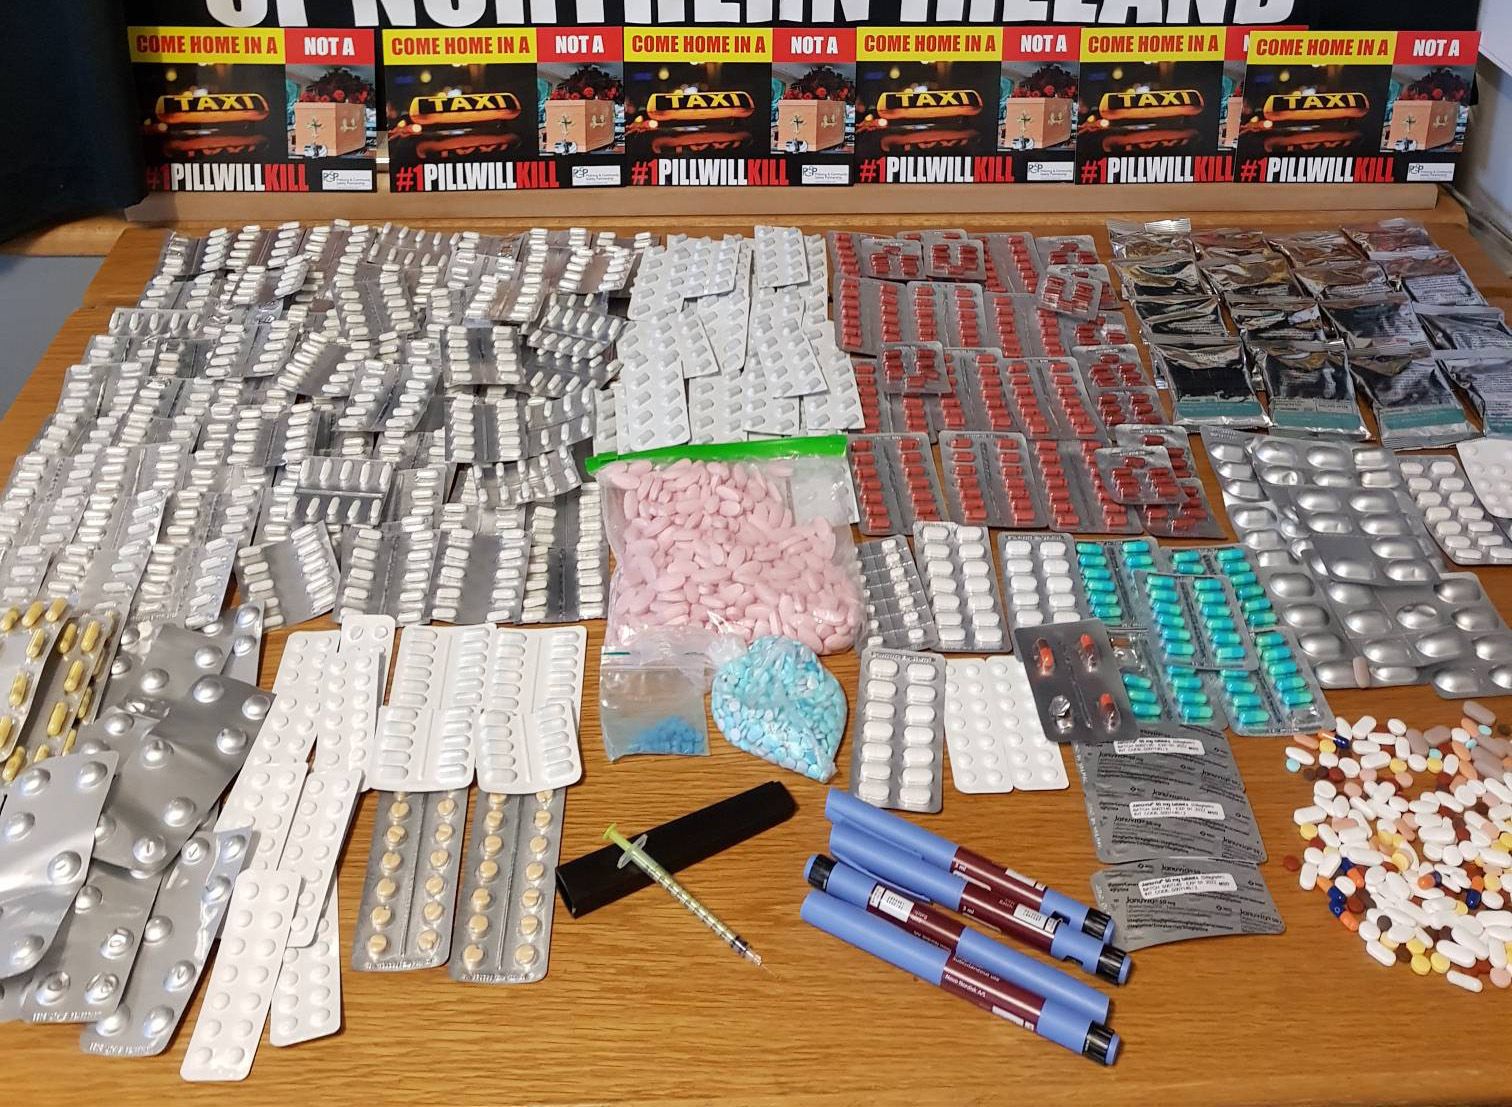 RECOVERED: The large quantity of drugs recovered from local BDACT (Belfast Drug and Alcohol Coordination Team) bins in North Belfast over the Christmas period